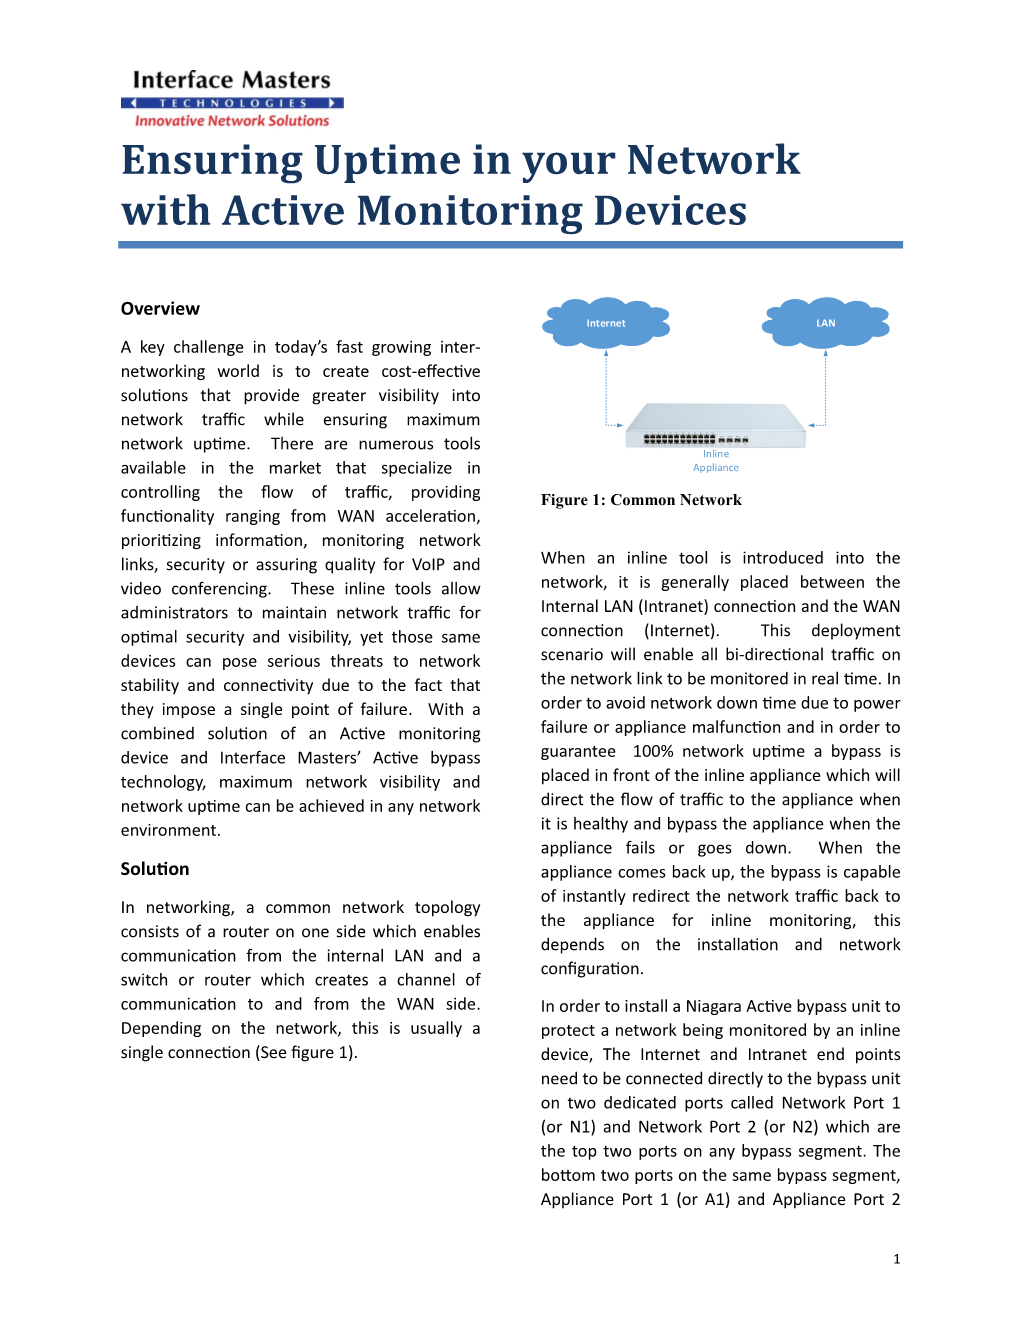 Ensuring Uptime in Your Network with Active Monitoring Devices